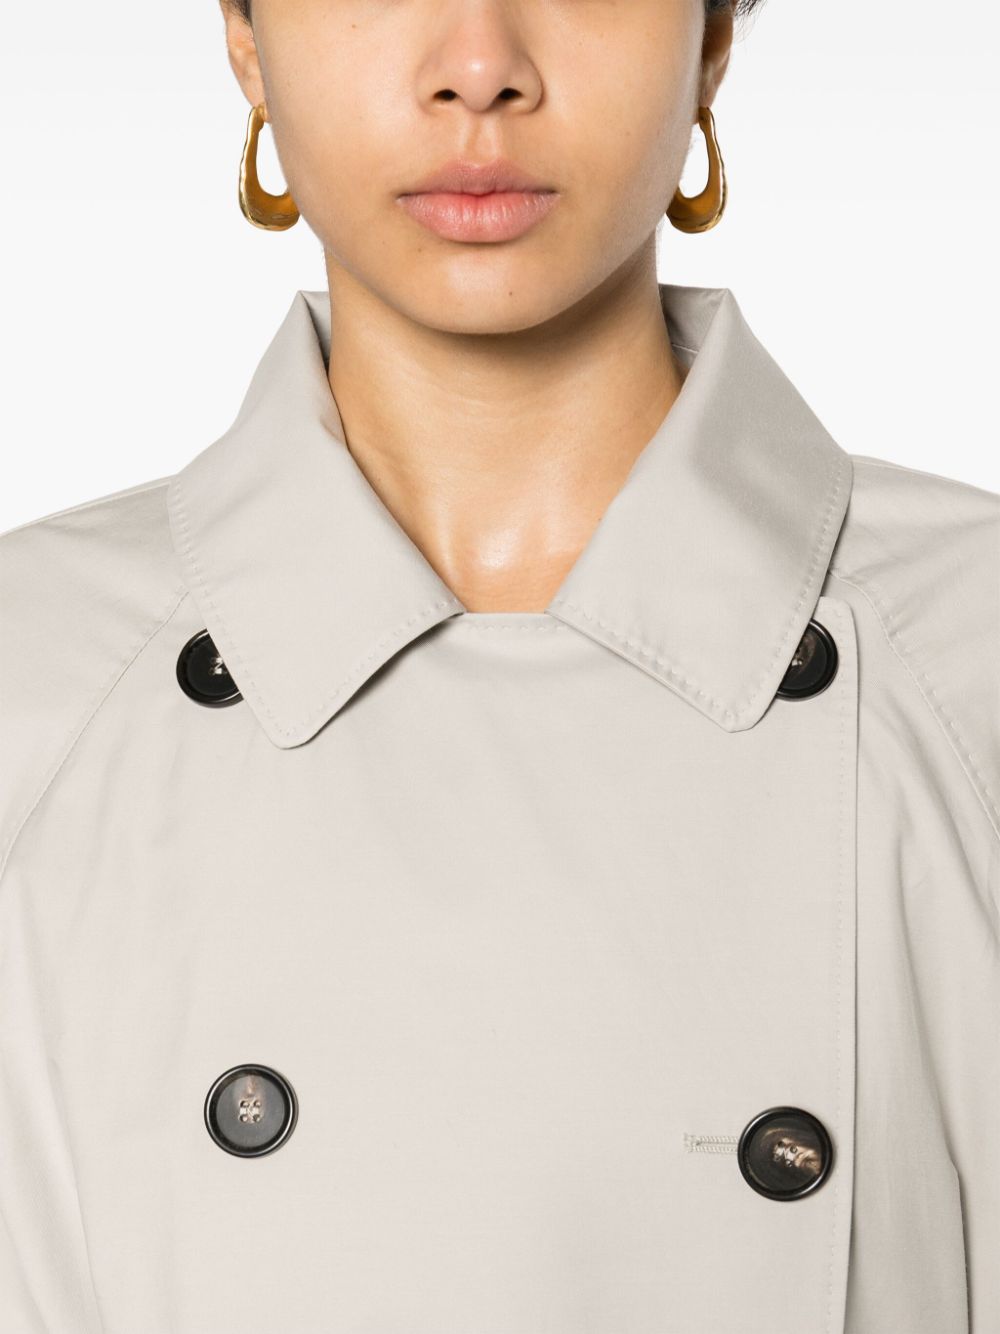 Ti trench coat<BR/>The Cube Collection